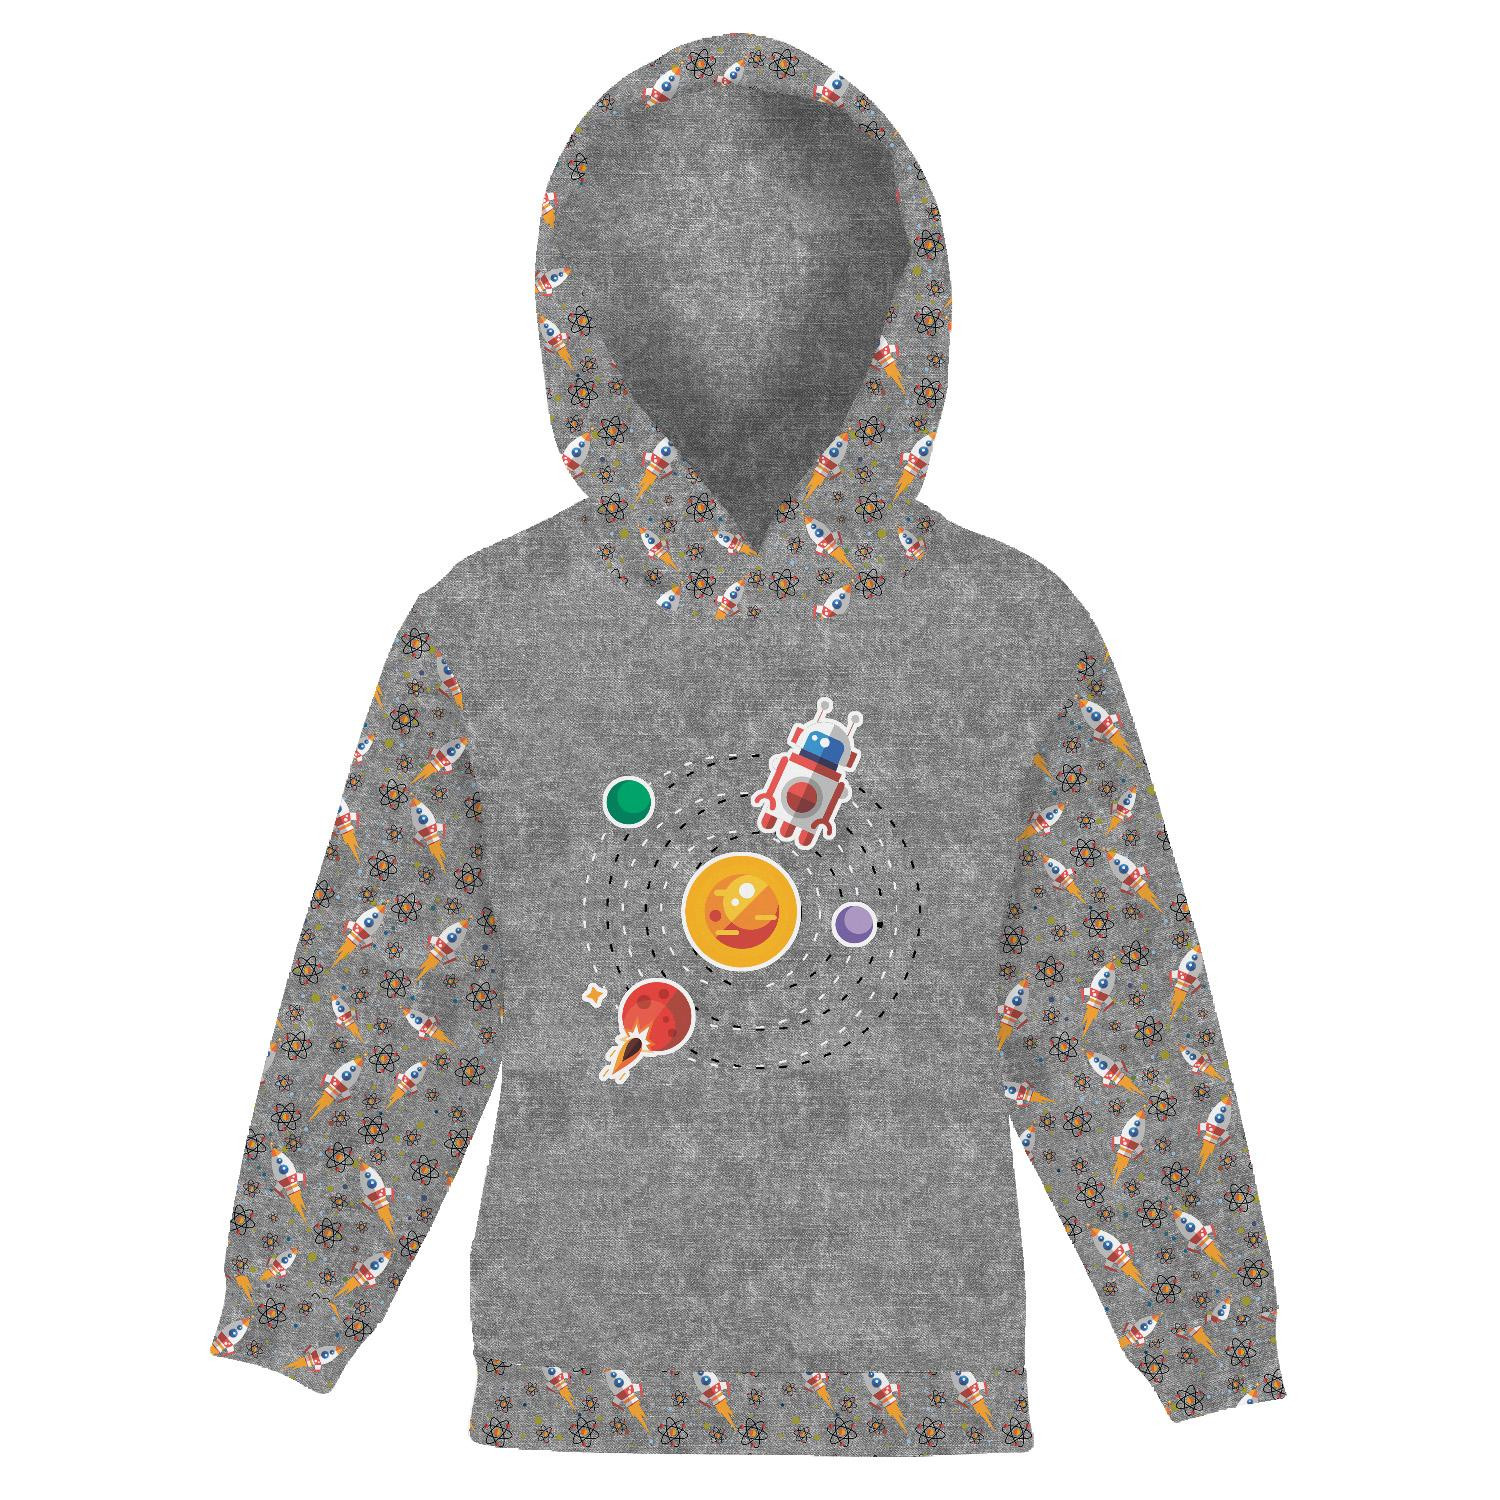 KID'S HOODIE (ALEX) - SOLAR SYSTEM (SPACE EXPEDITION) / ACID WASH GREY - sewing set